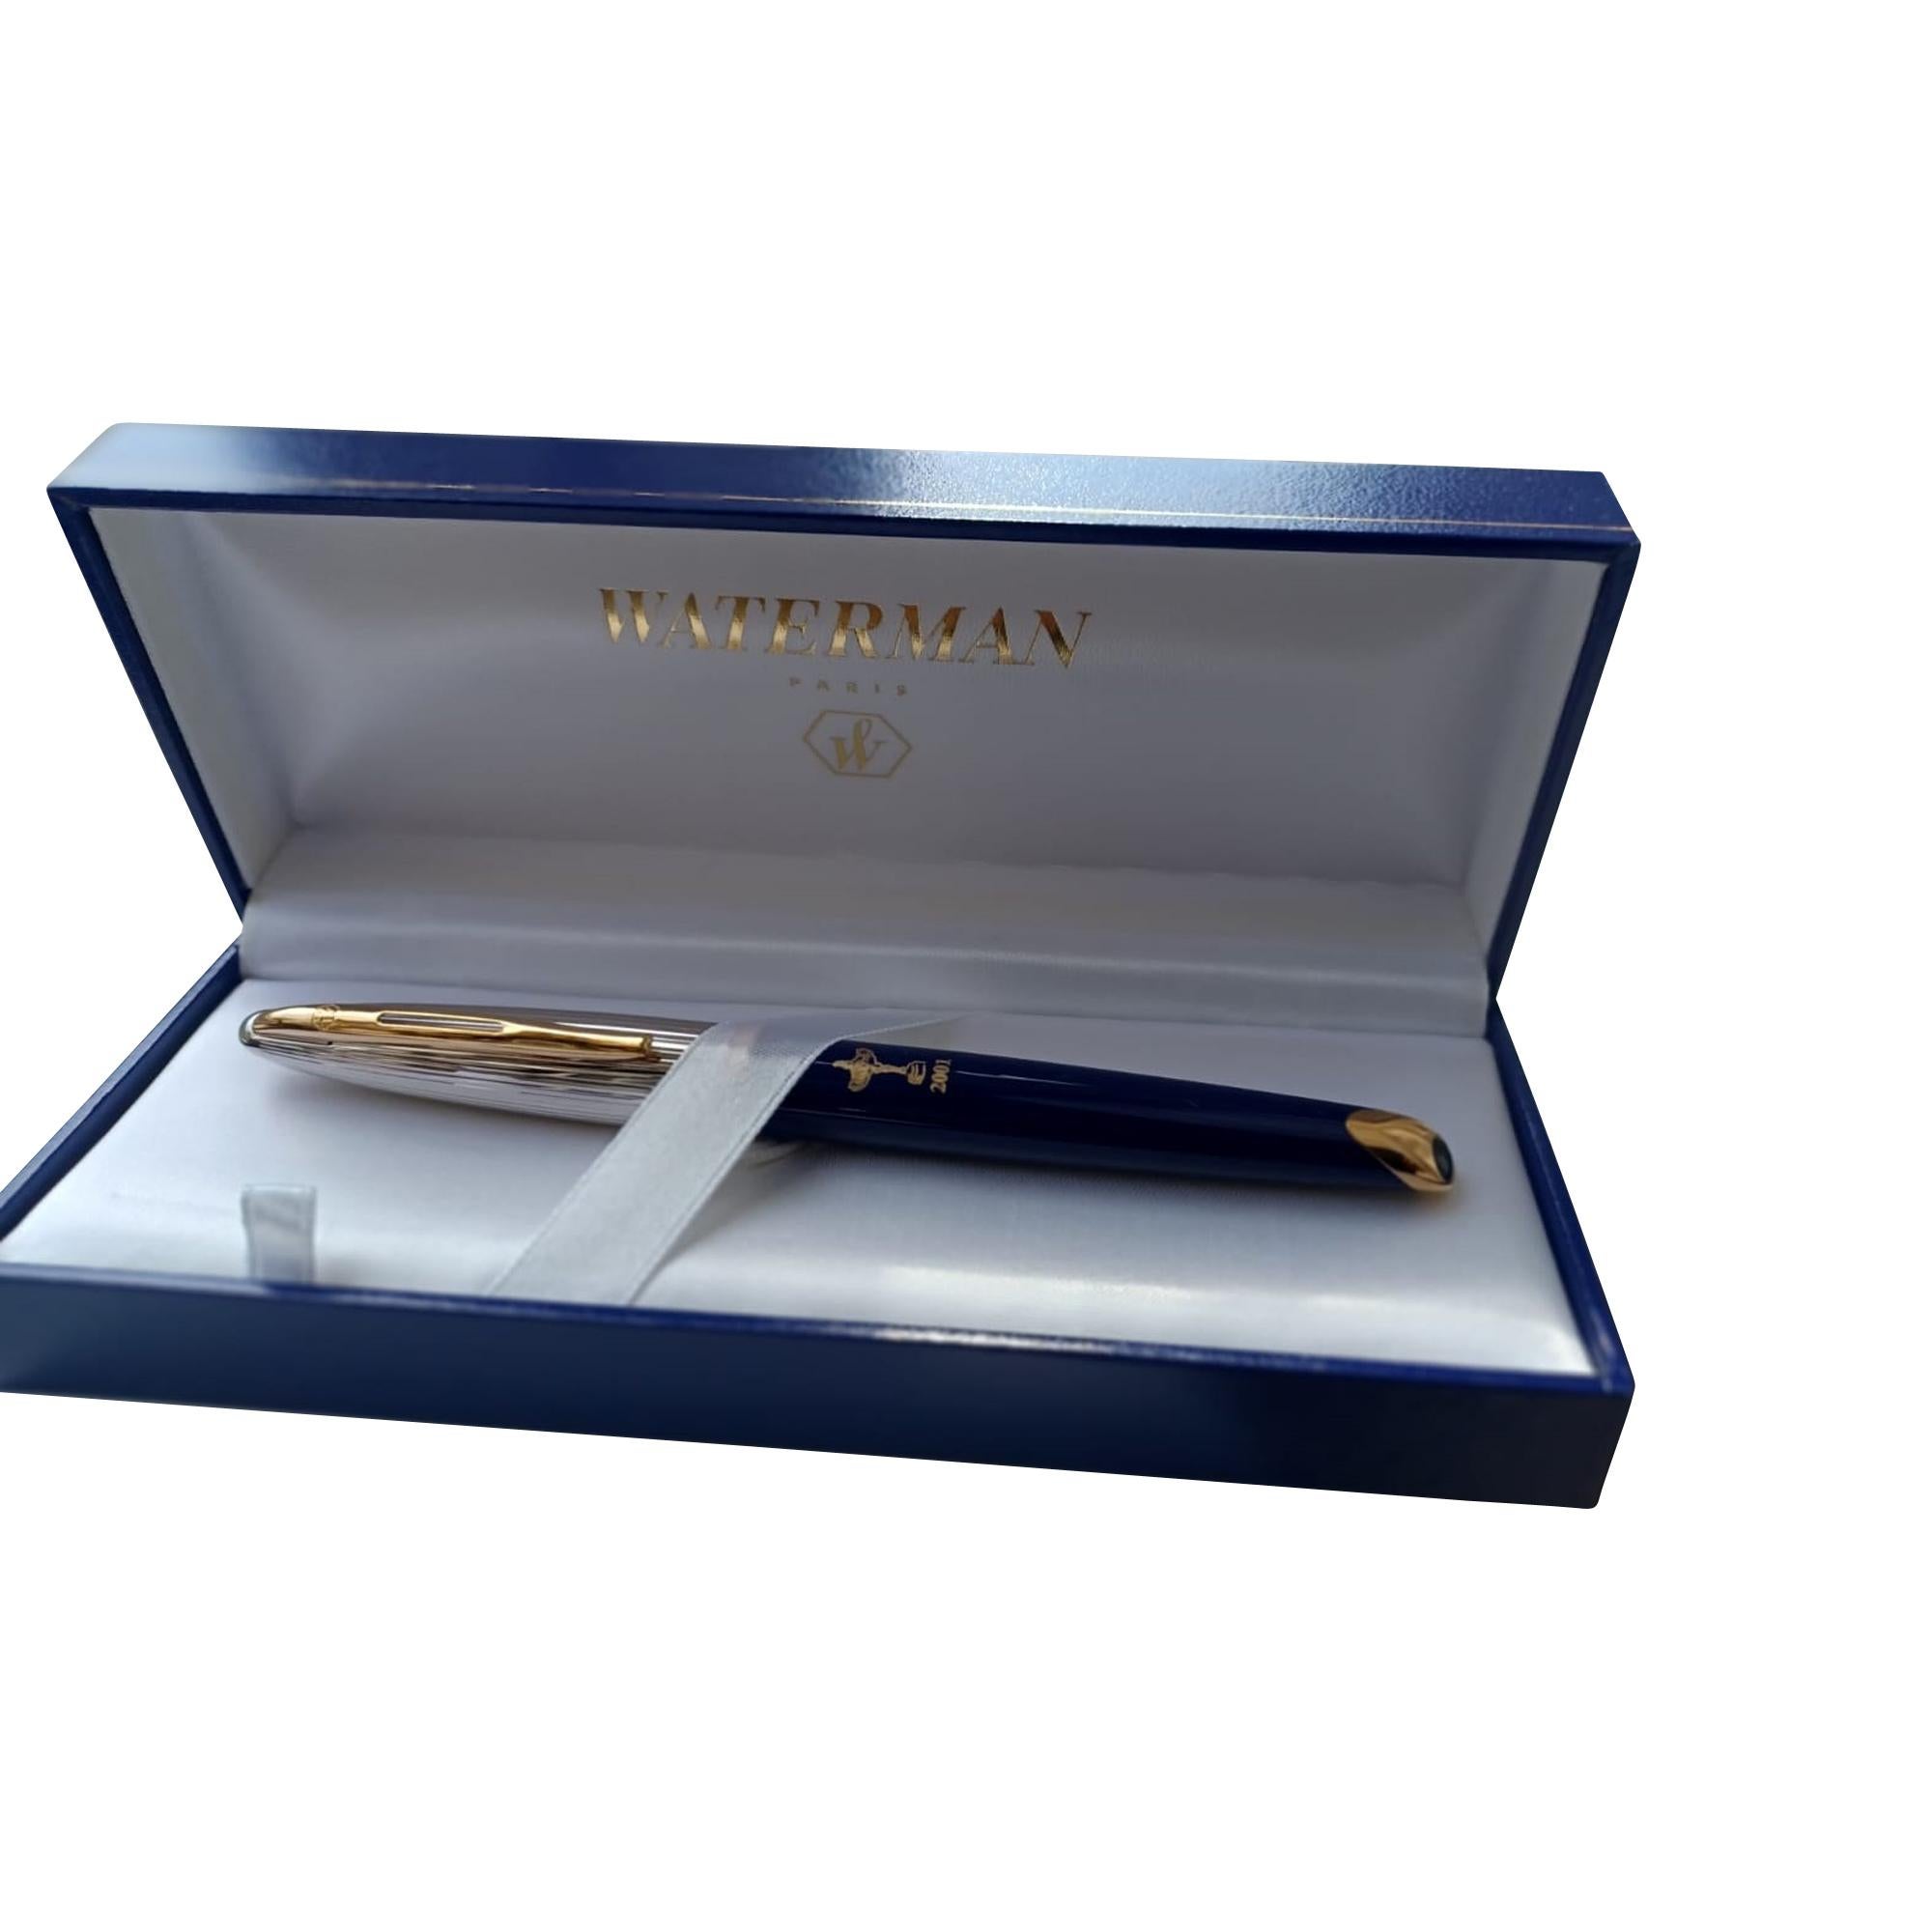 Rare 2001 Postponed Ryder Cup Waterman Ink Fountain Pen with 18K Gold Nib For Sale 9